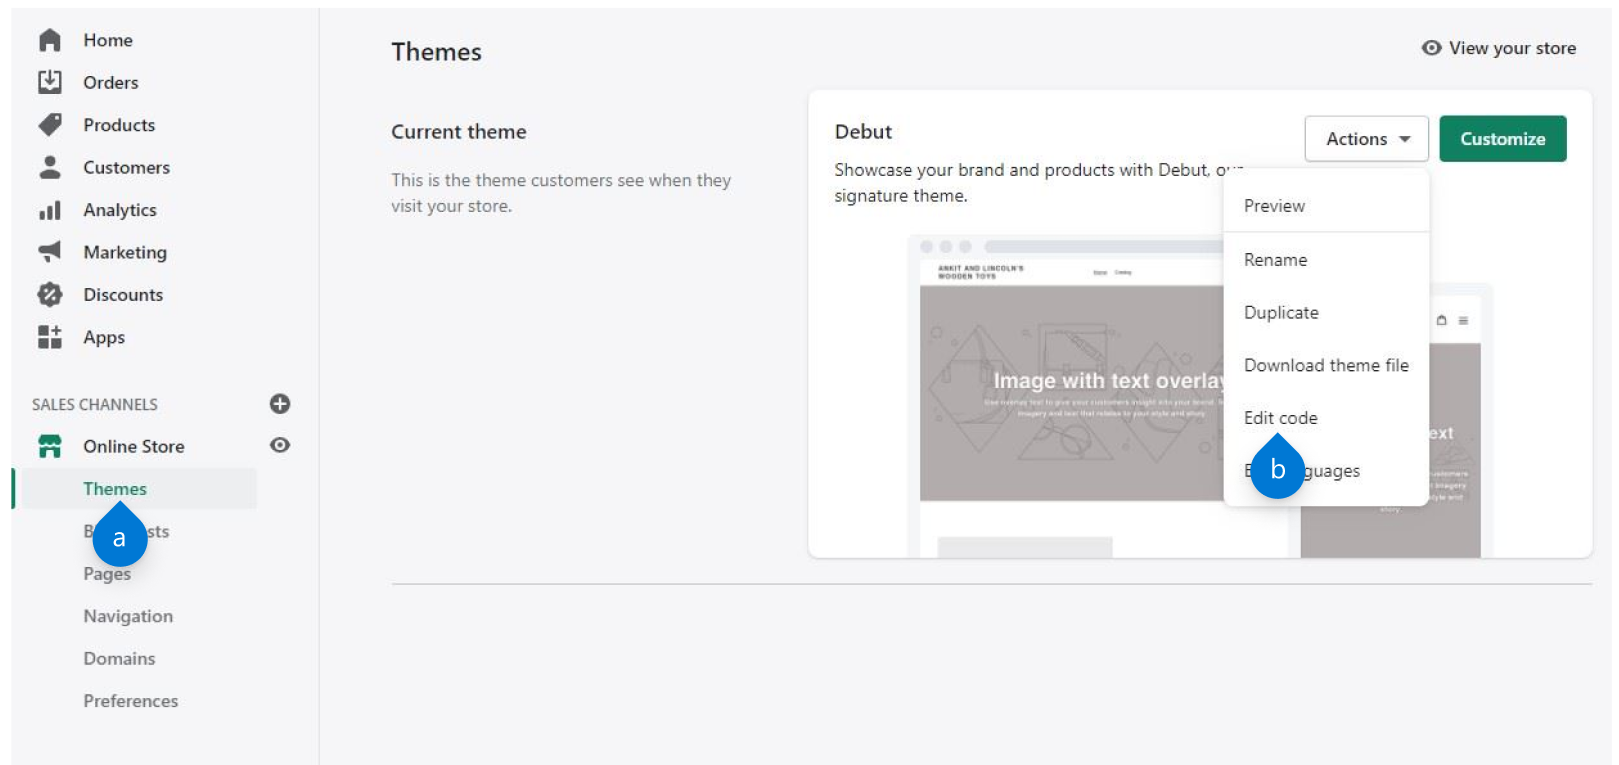 Edit code in the themes section of Shopify